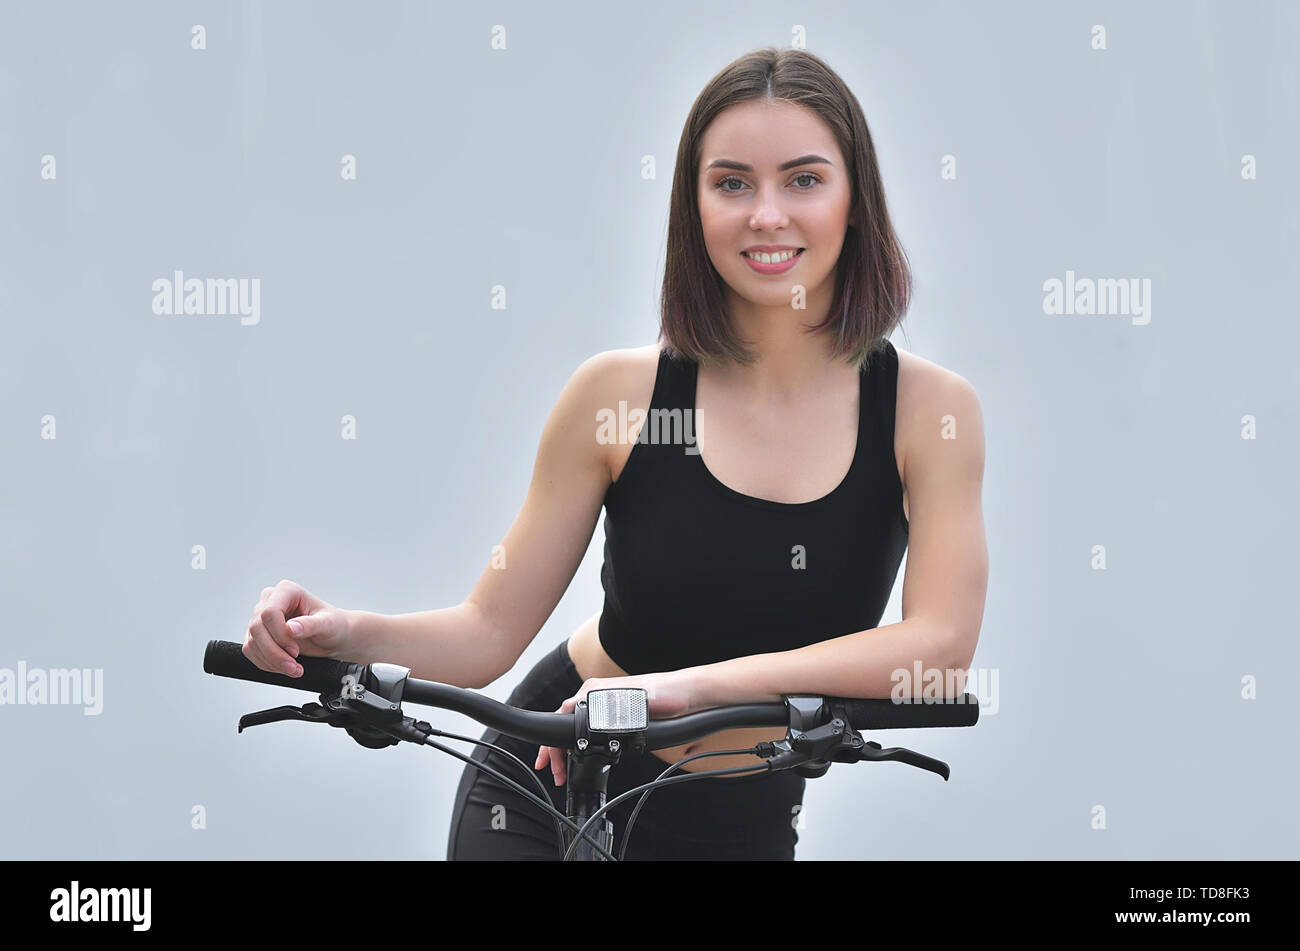 Smiling beautiful young girl standing with her bicycle on the street. City scene. Warm summer day. Stock Photo